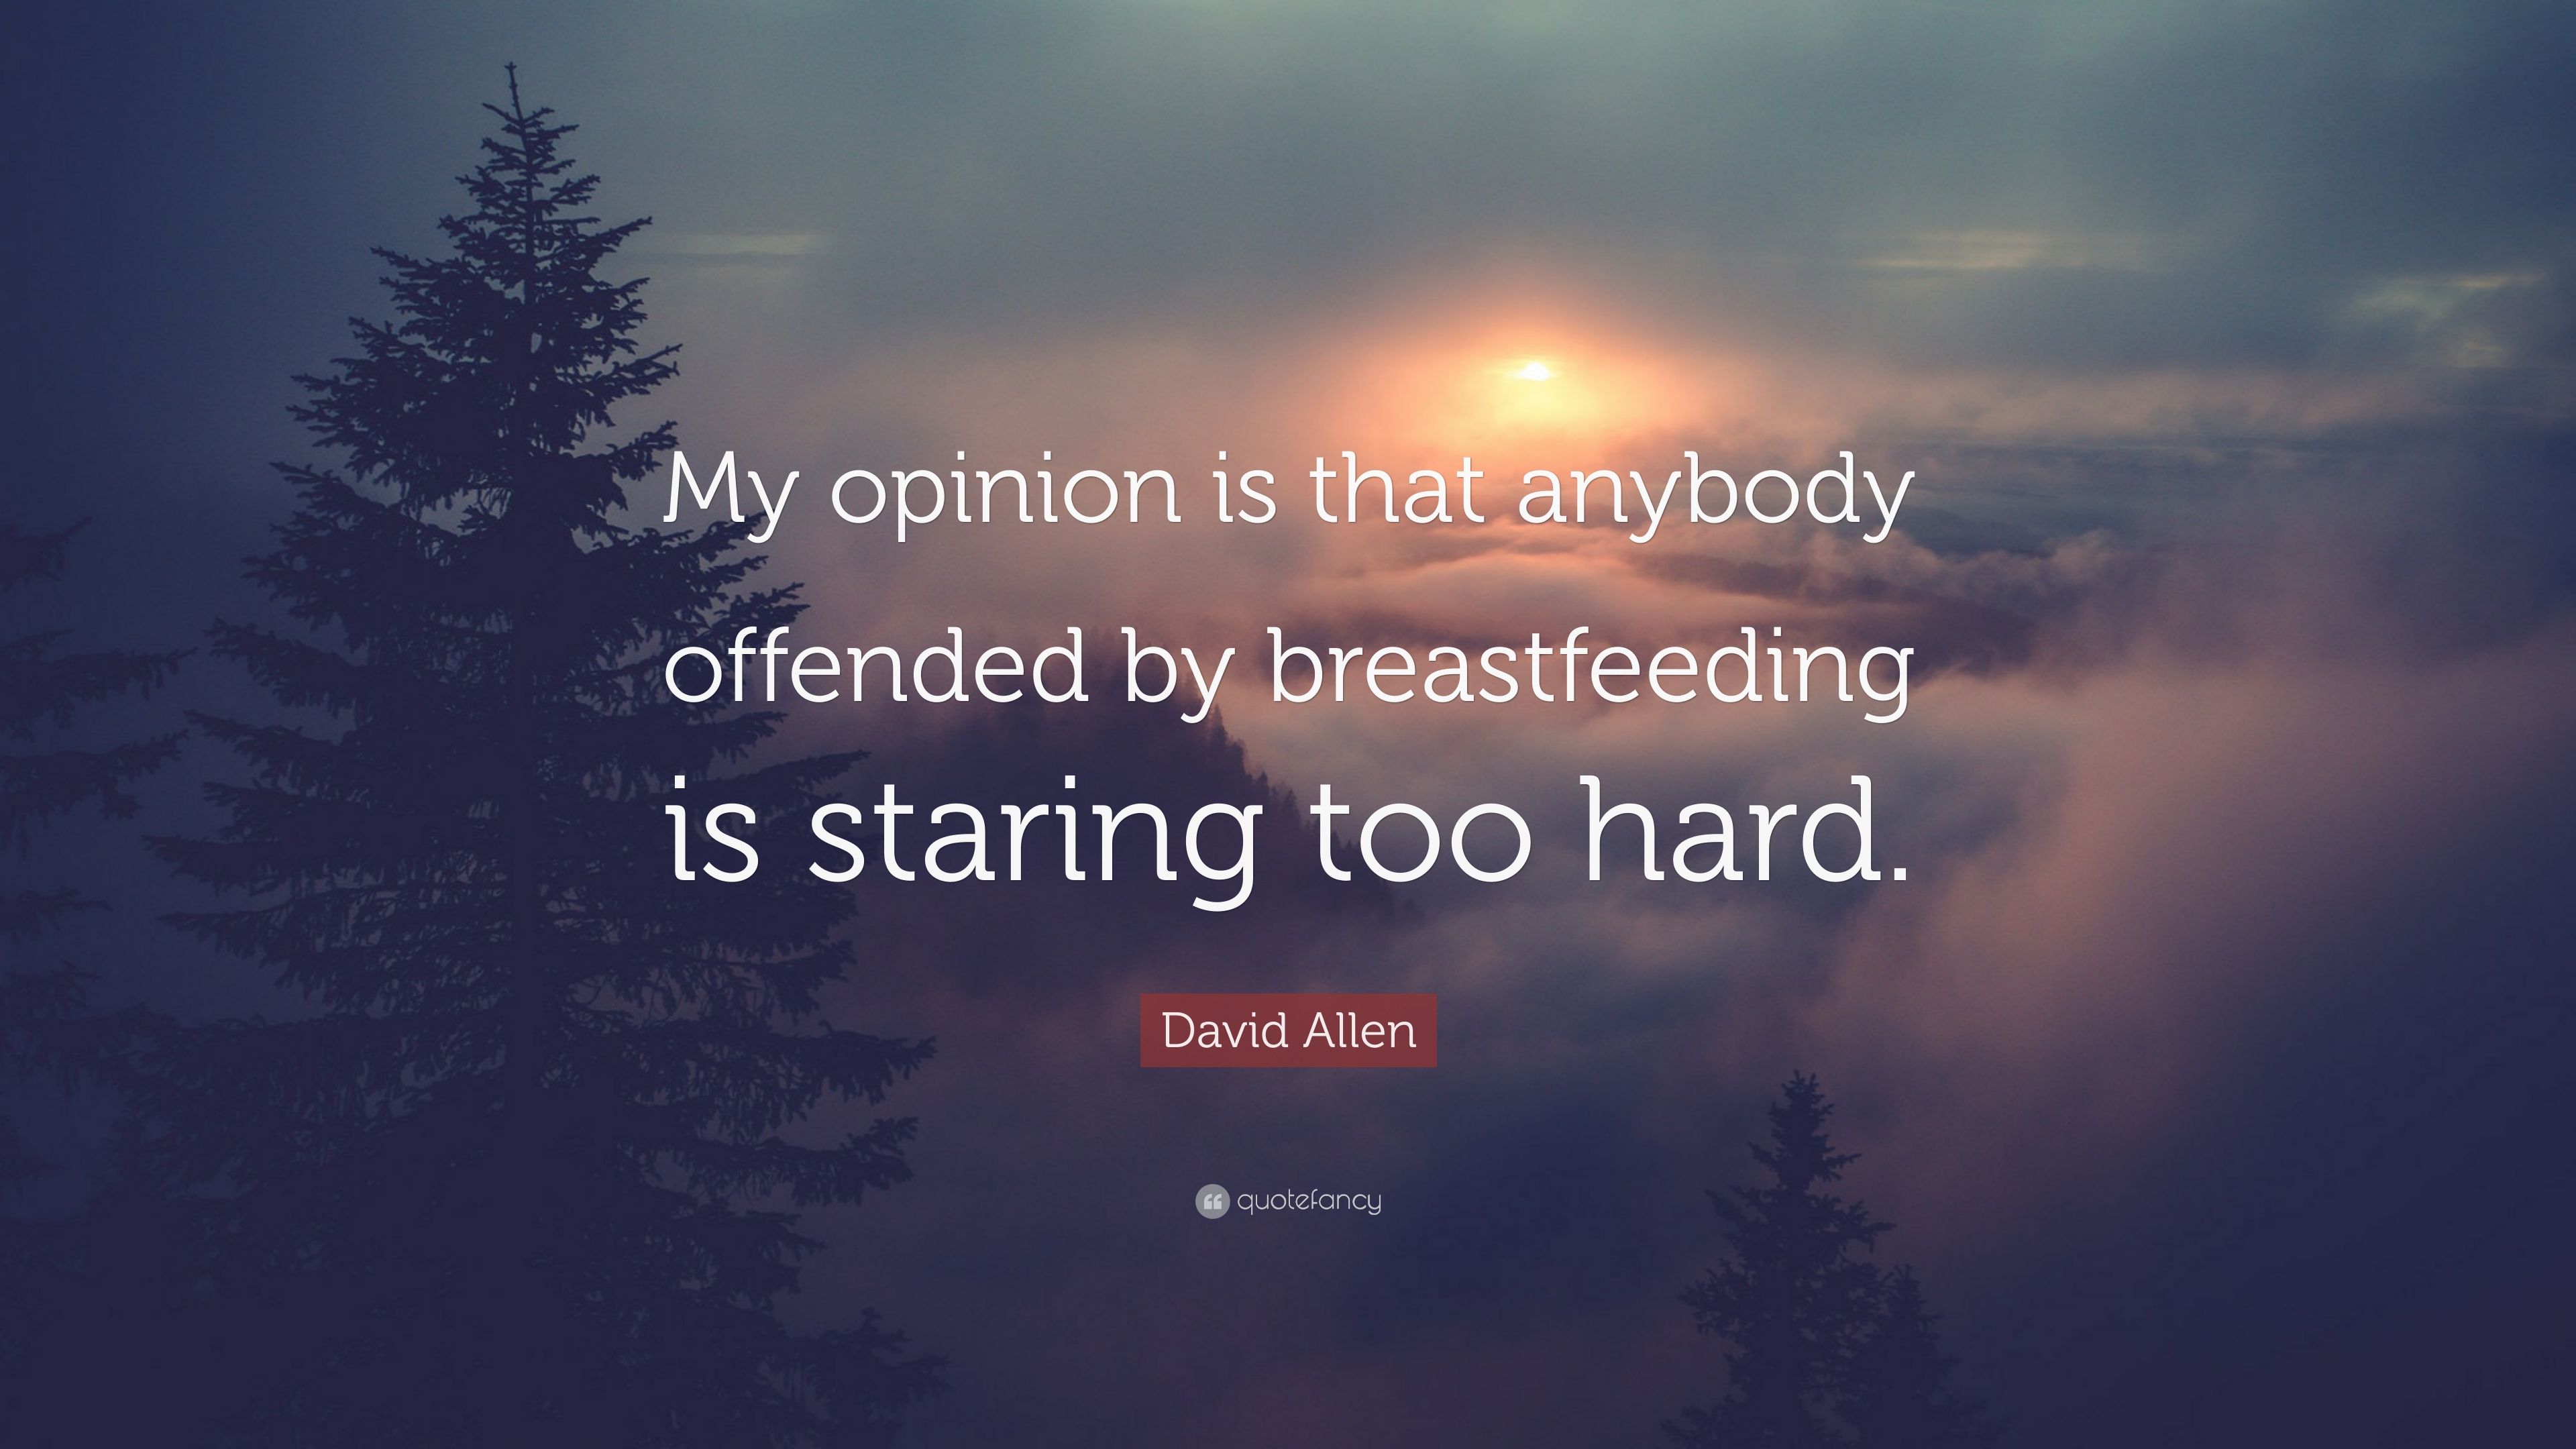 David Allen Quote: "My opinion is that anybody offended by breastfeedi...